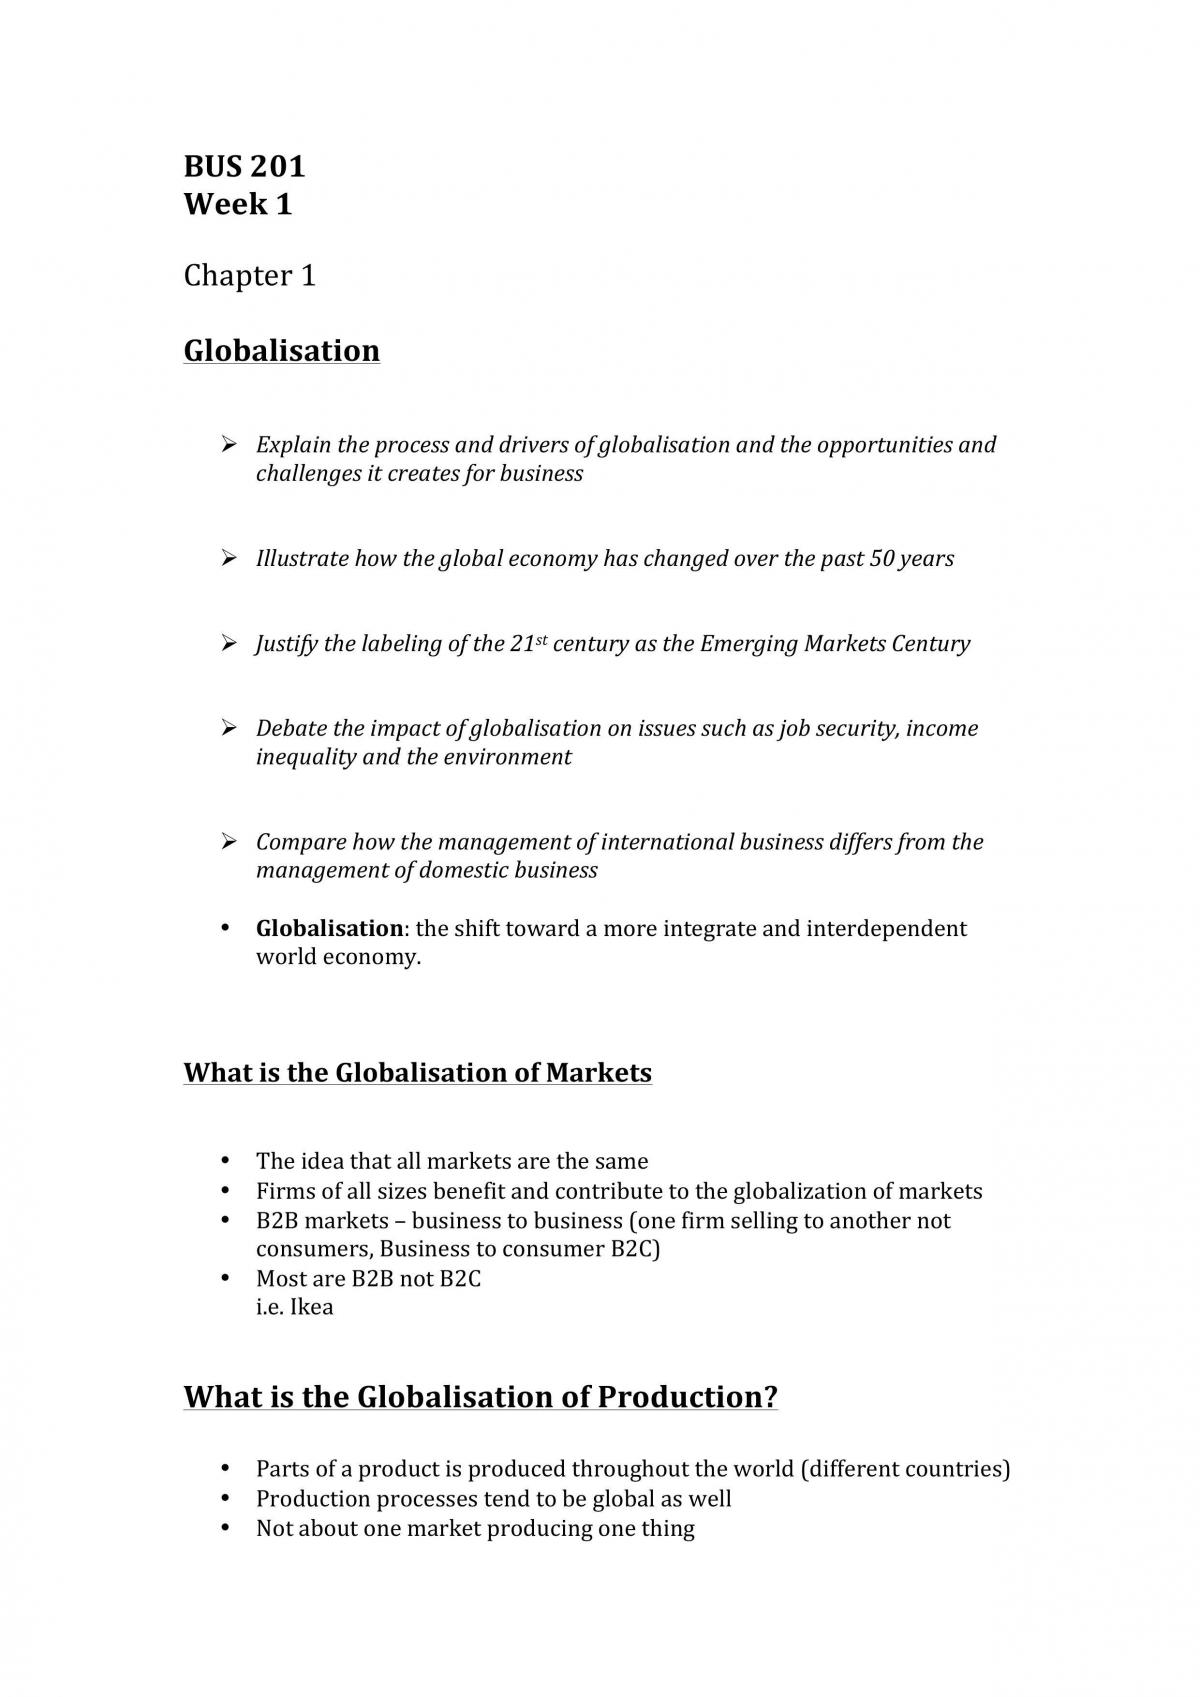 Introduction to Global Business - Weeks 1-6 Study Notes - Page 1